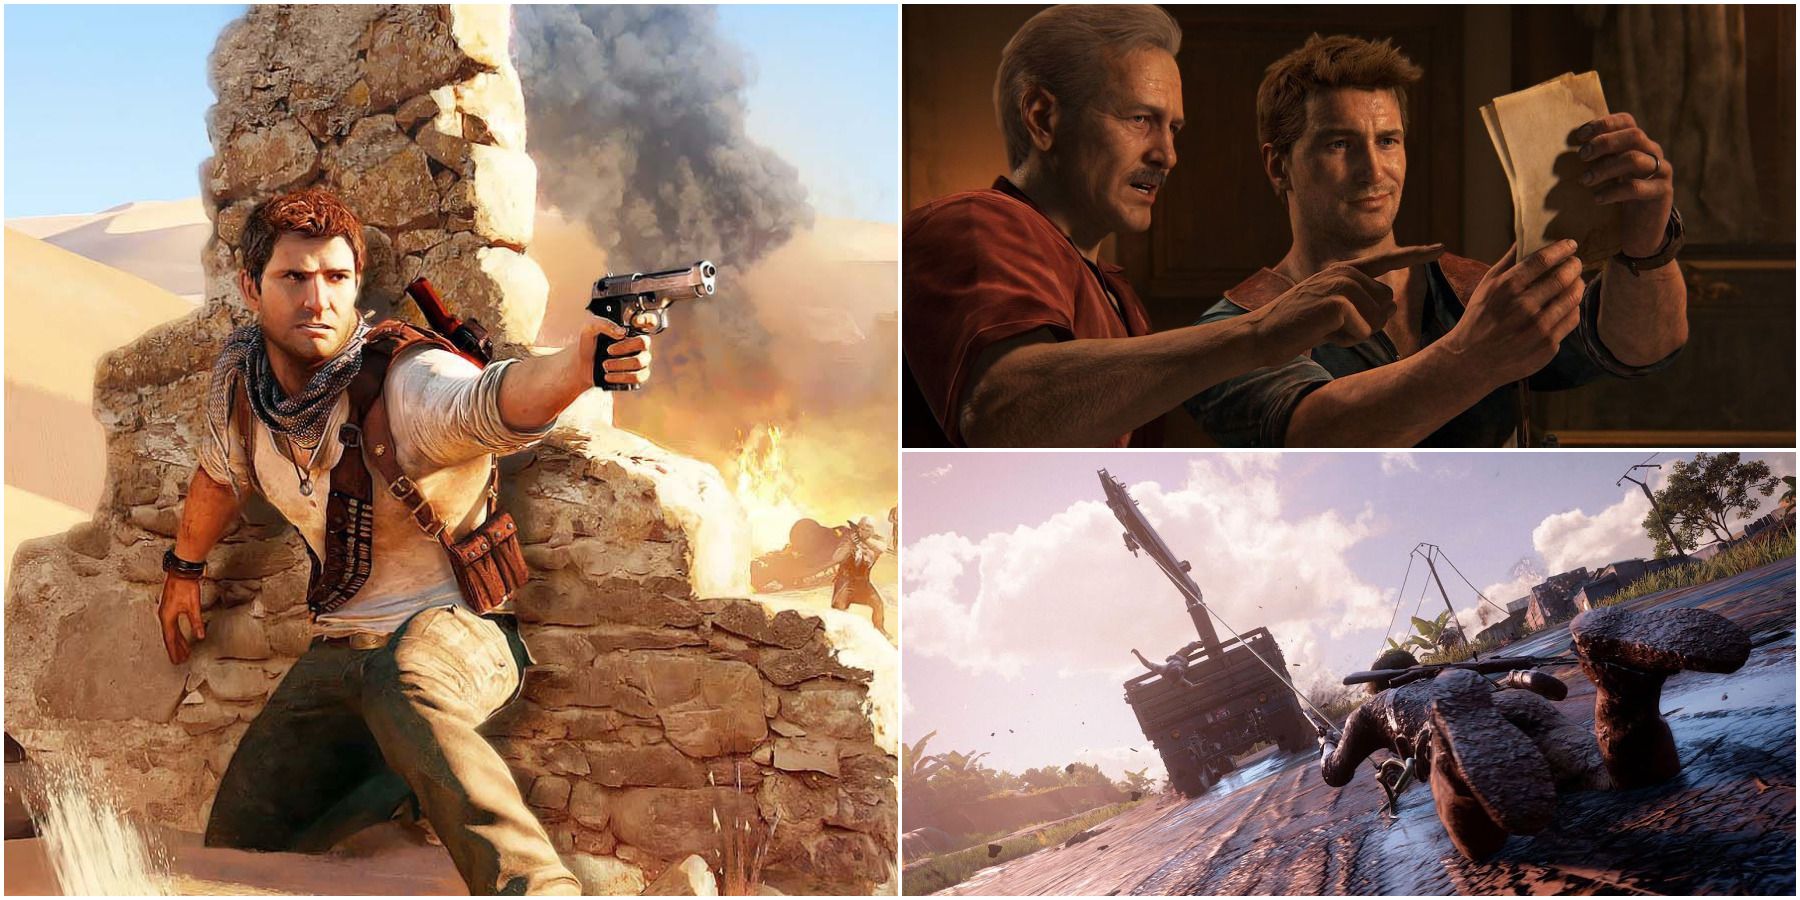 Nathan Drake questions his treasure's worth in new Uncharted 4